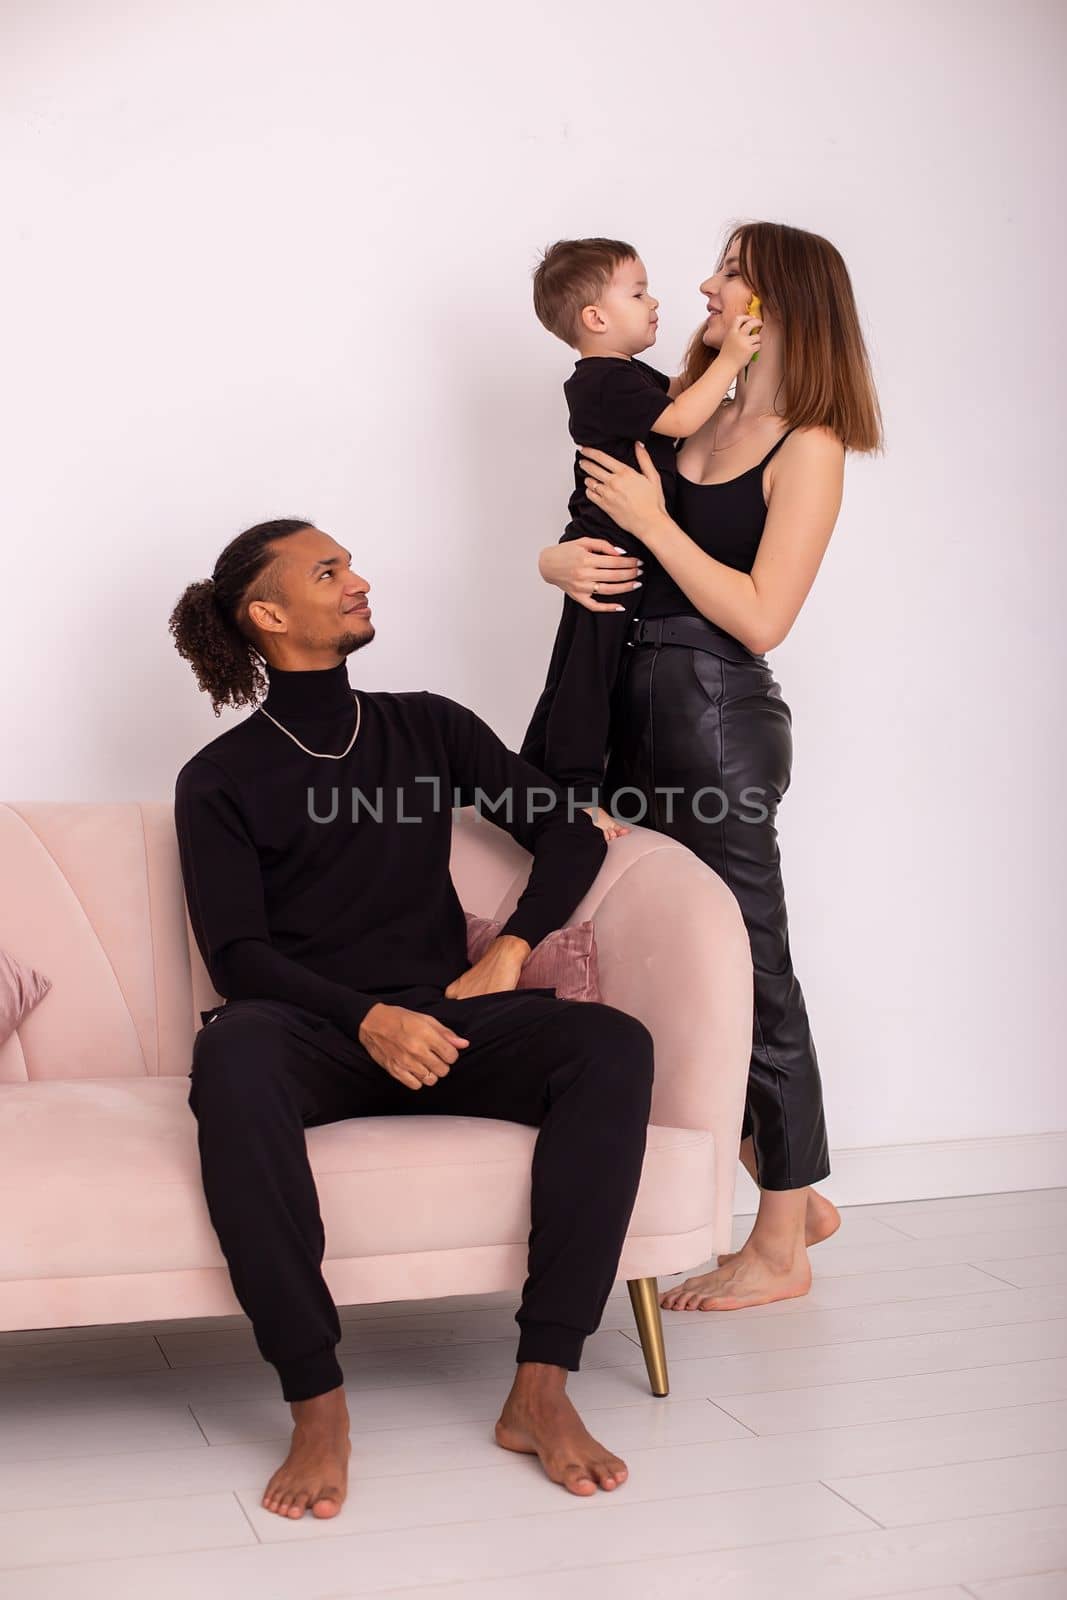 Happy multiracial family with little boy, in black clothes, with bare foot , sits in the light living room on light pink sofa. Vertical. Copy space